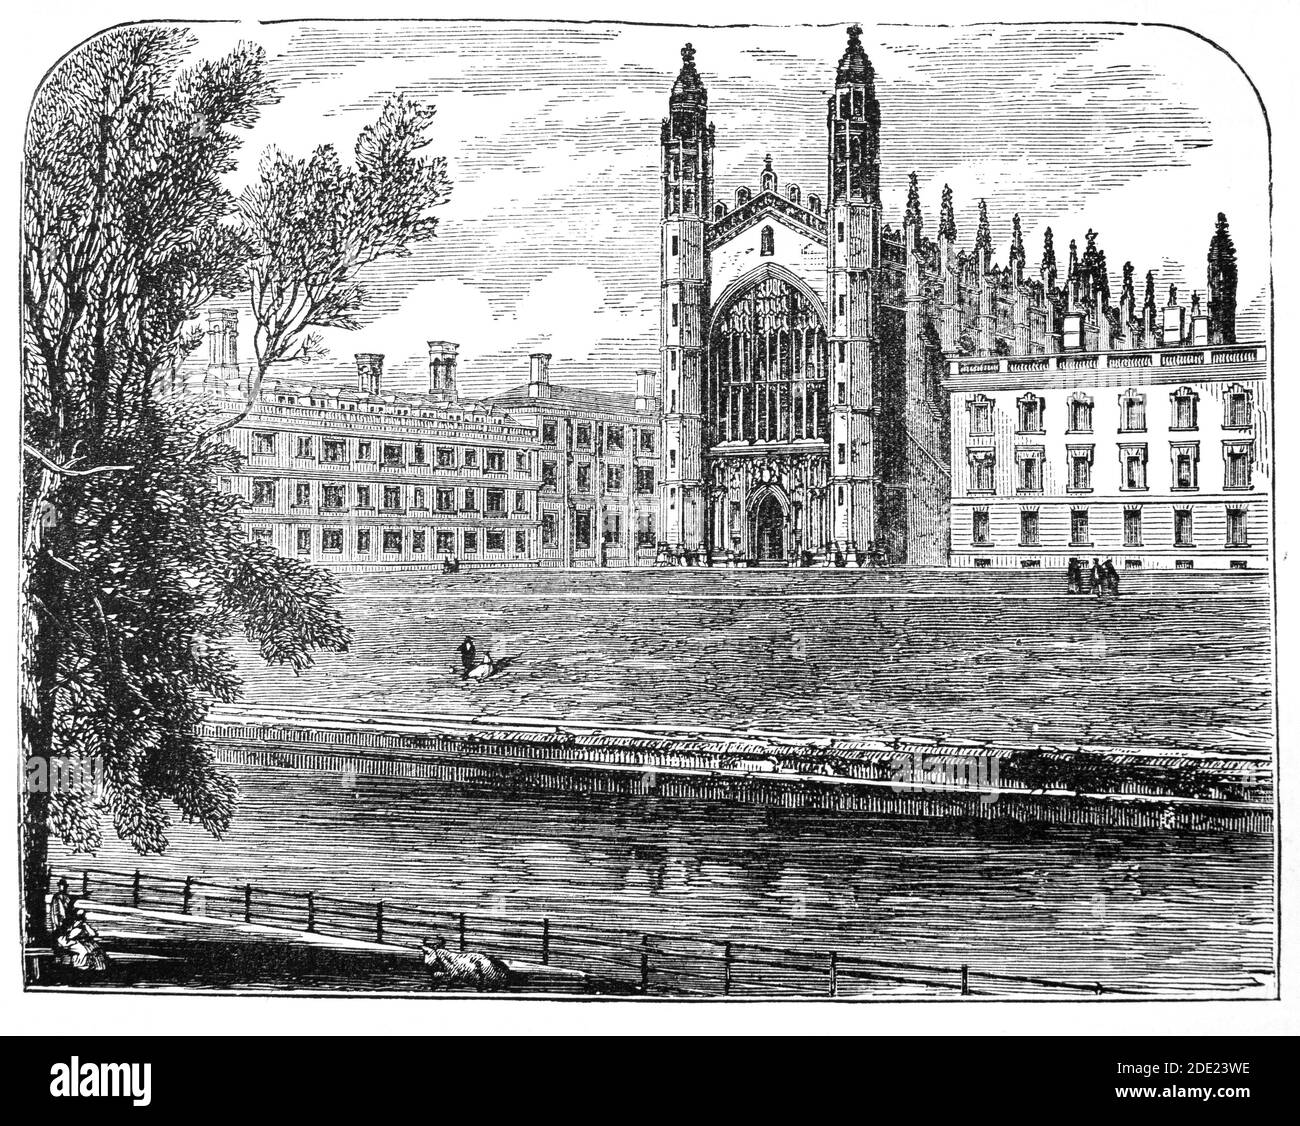 A 19th Century view across the River Cam of King's College, Cambridge, England. It was founded in 1441 by Henry VI, however, the King's plans for the college were disrupted by the Wars of the Roses, a scarcity of funds, as well as his eventual deposition. In 1508 Henry VII began to take an interest and the building of the college's chapel, begun in 1446, was finally finished in 1544 during the reign of Henry VIII. The Chapel is regarded as one of the greatest examples of late Gothic English architecture, with the world's largest fan vault, and stained-glass windows and a wooden chancel screen Stock Photo